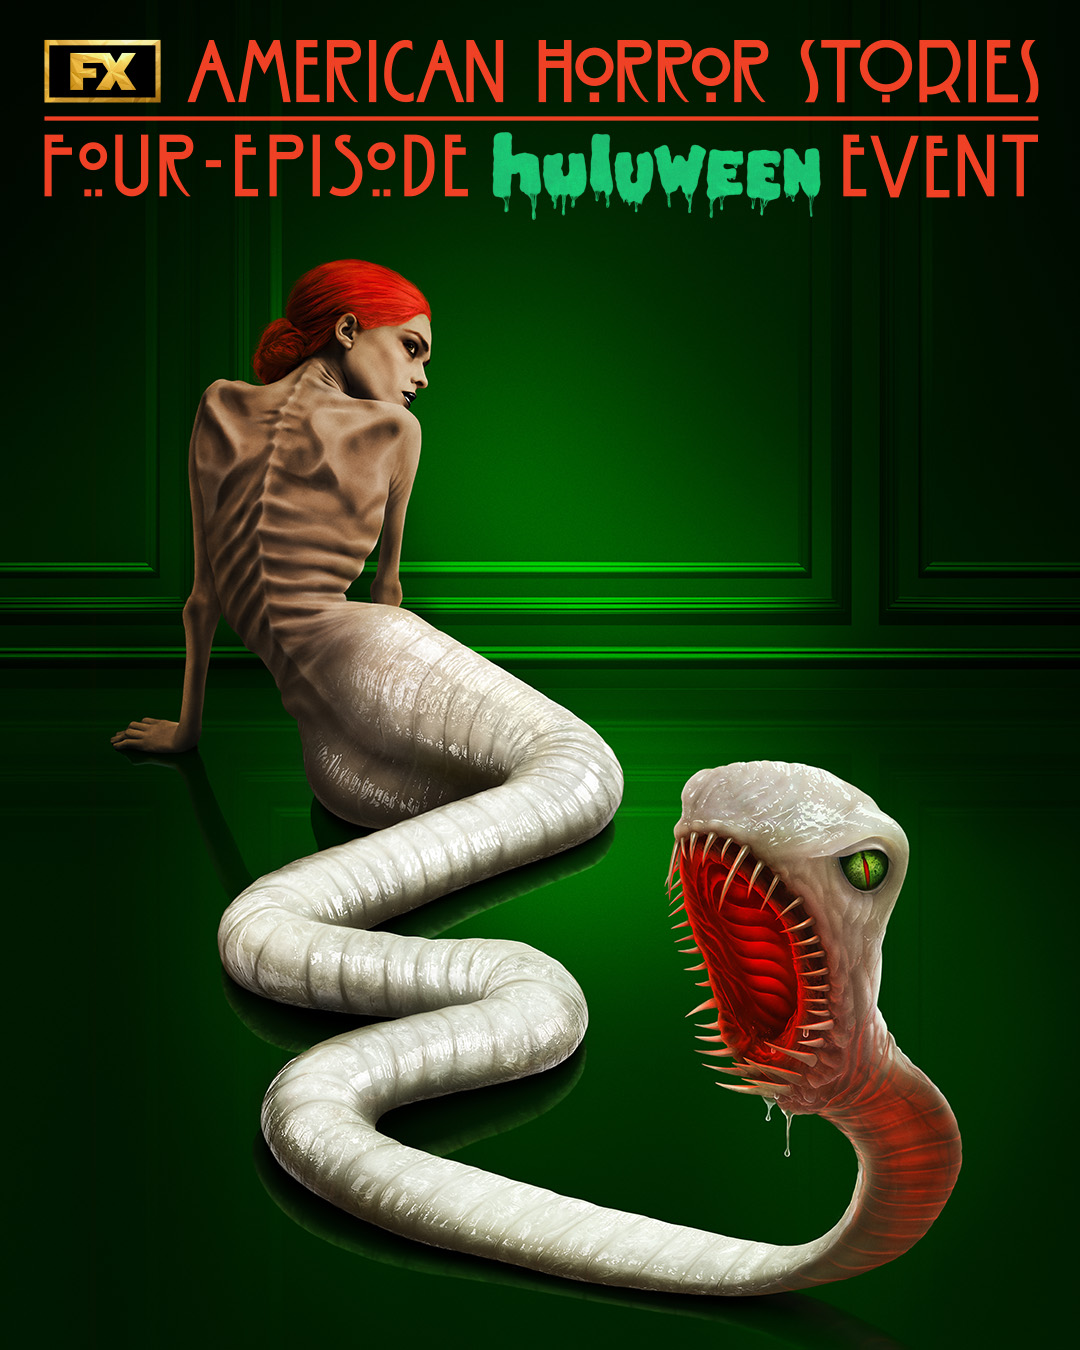 Emaciated figure with legs that turn into a tapeworm for FX’s American Horror Stories Huluween event